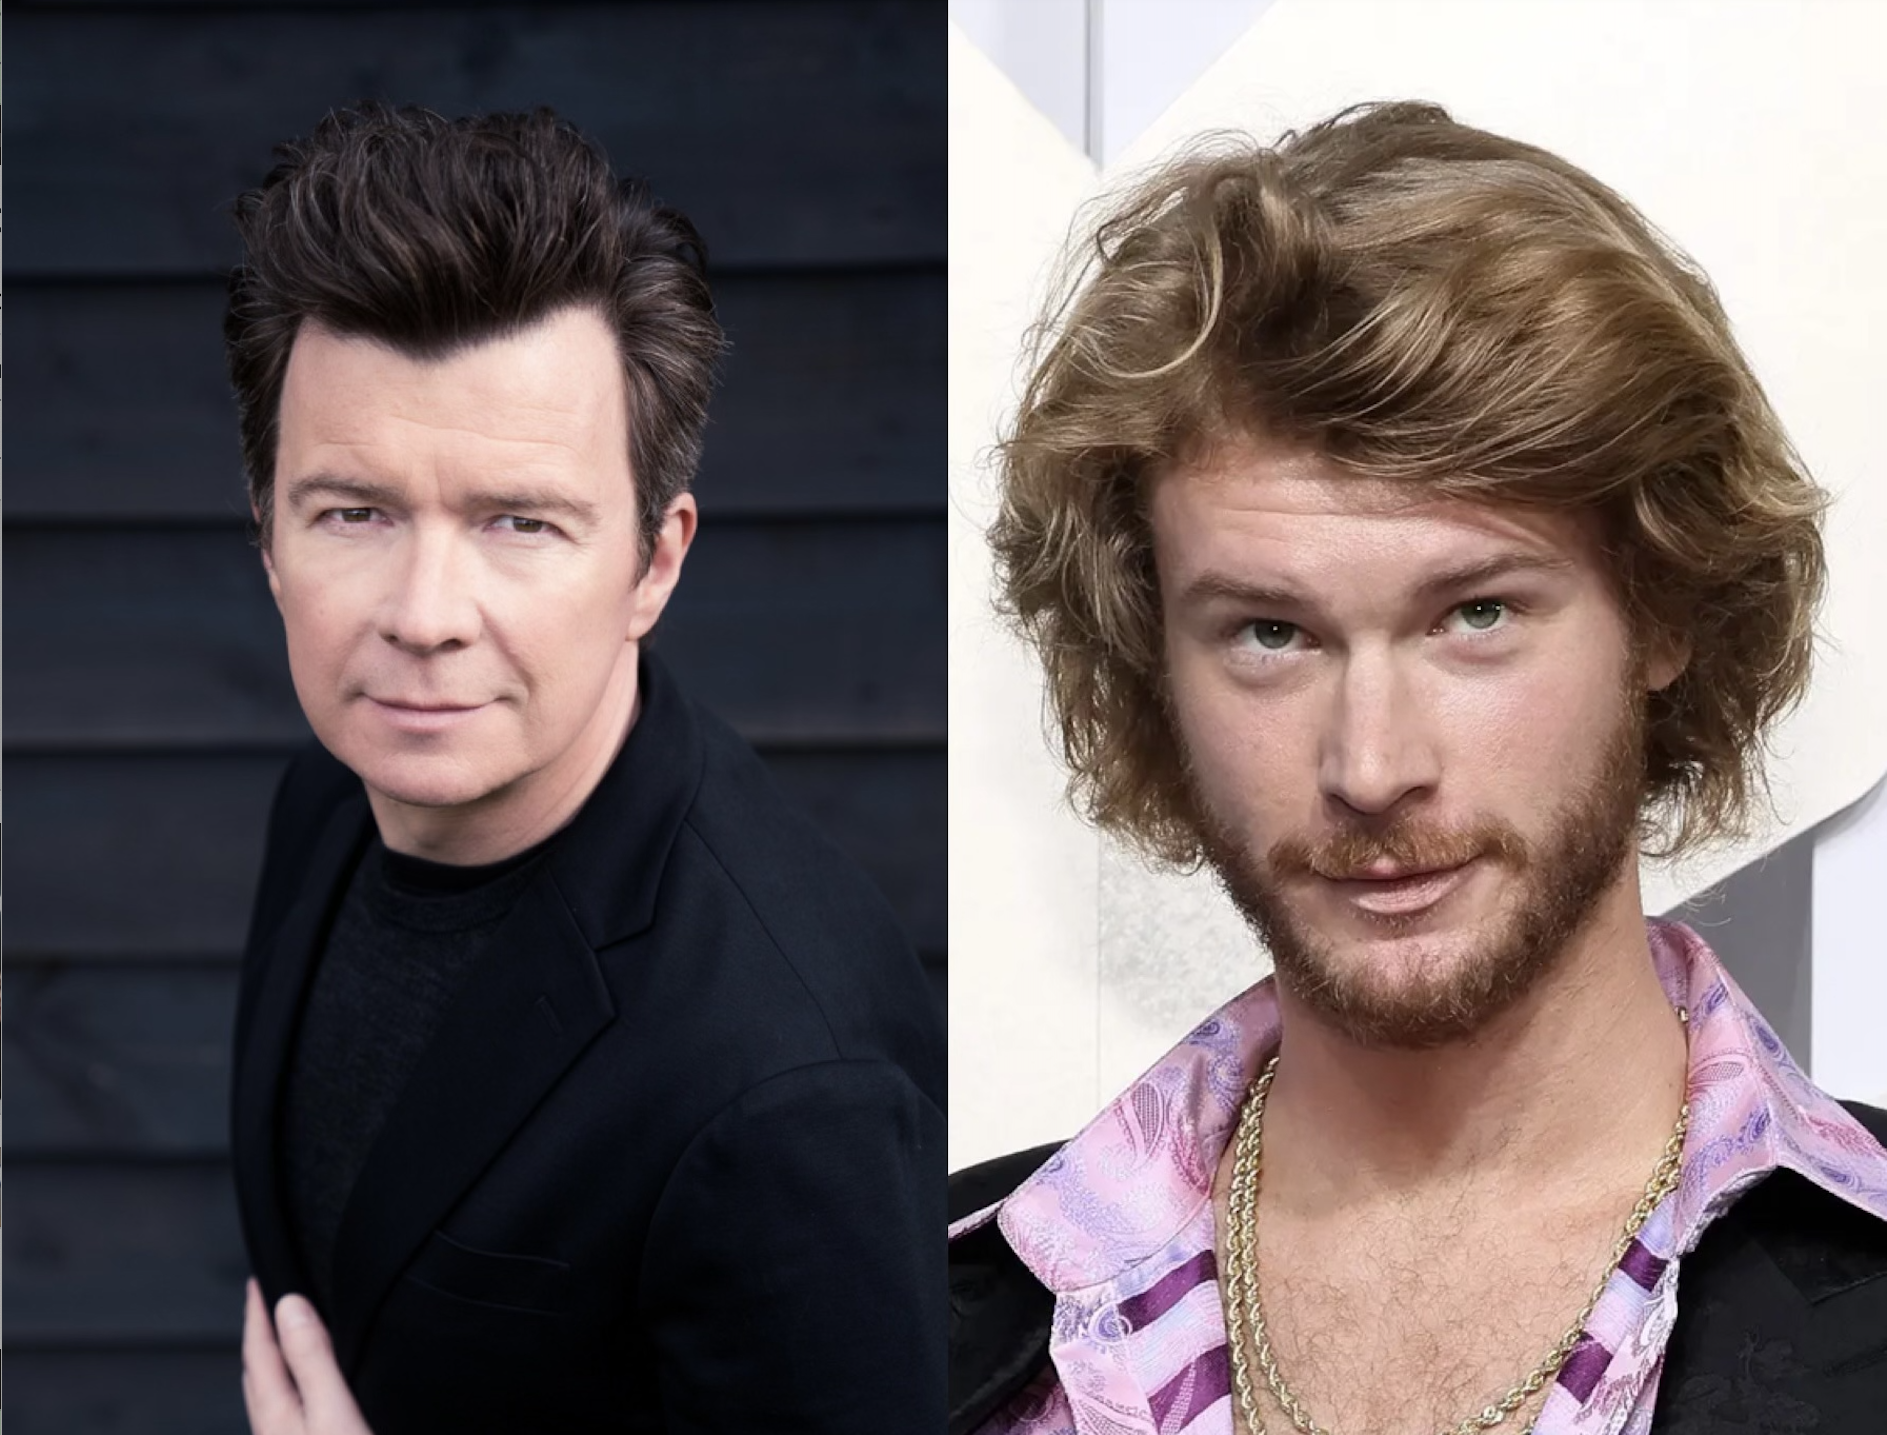 Why Astley's New Soundalike Lawsuit Should Be Rickrolled Out Of Court